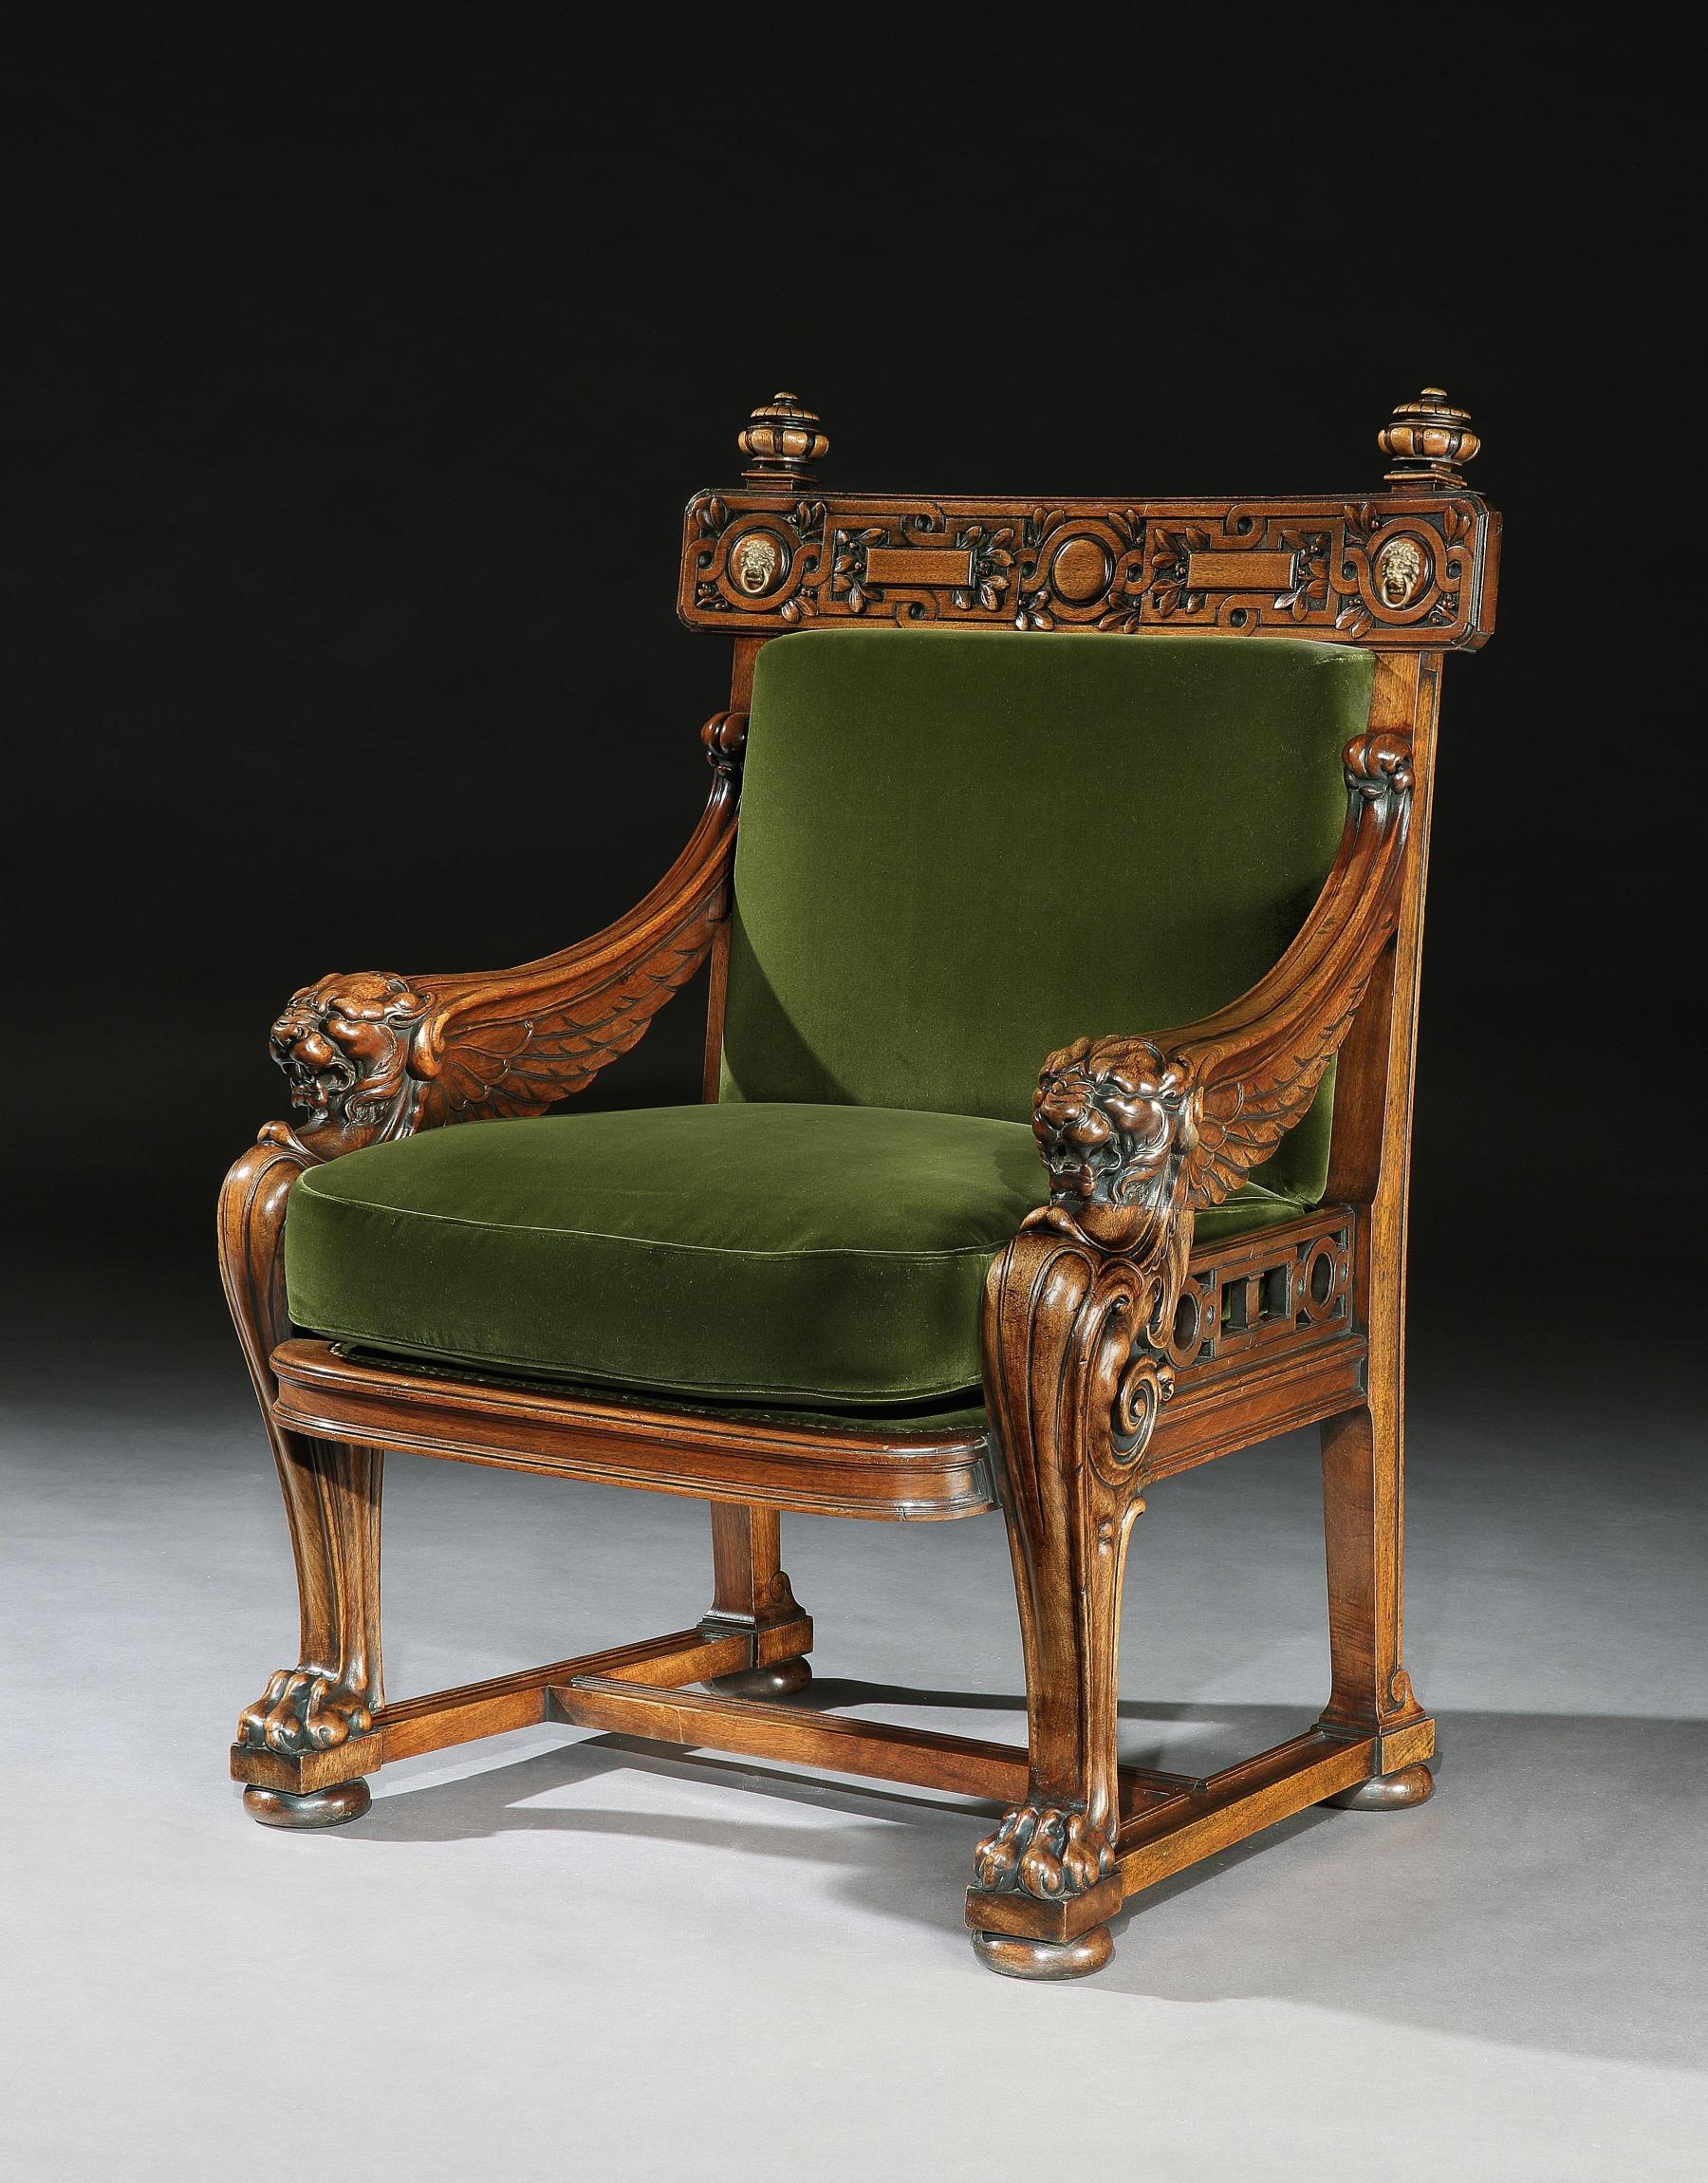 A very fine and impressive European walnut monopodia library armchair, upholstered in a Rosie Uniacke cotton velvet moss, an almost identical armchair having been published in ‘English Furniture 1500-1840 by Geoffrey Beard & Judith